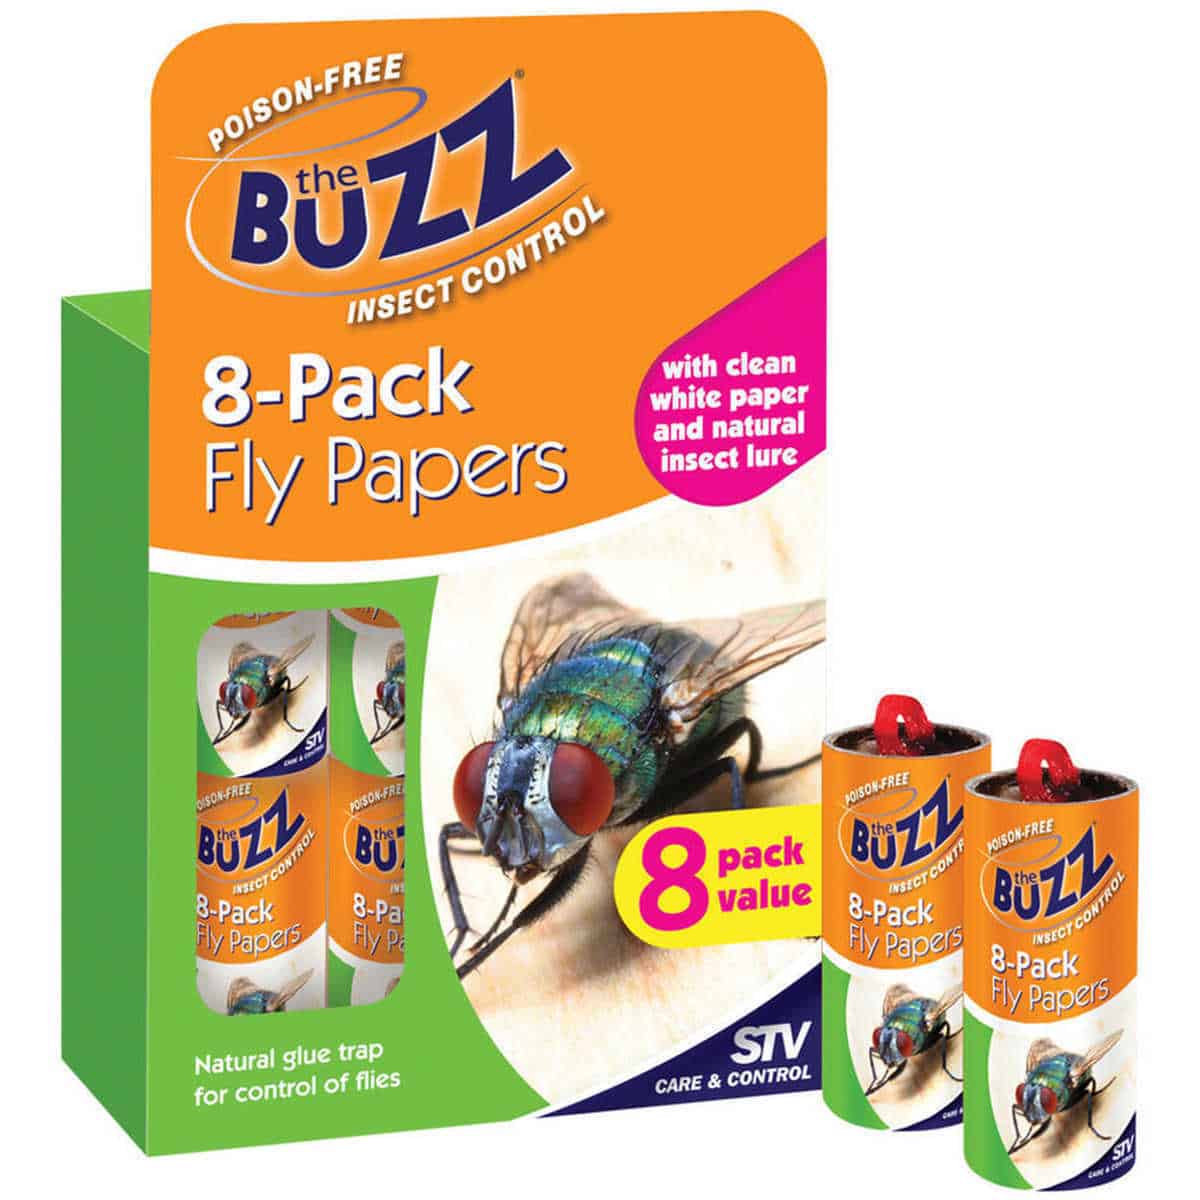 thebuzz Insect Control 8-Pack Ply Papers